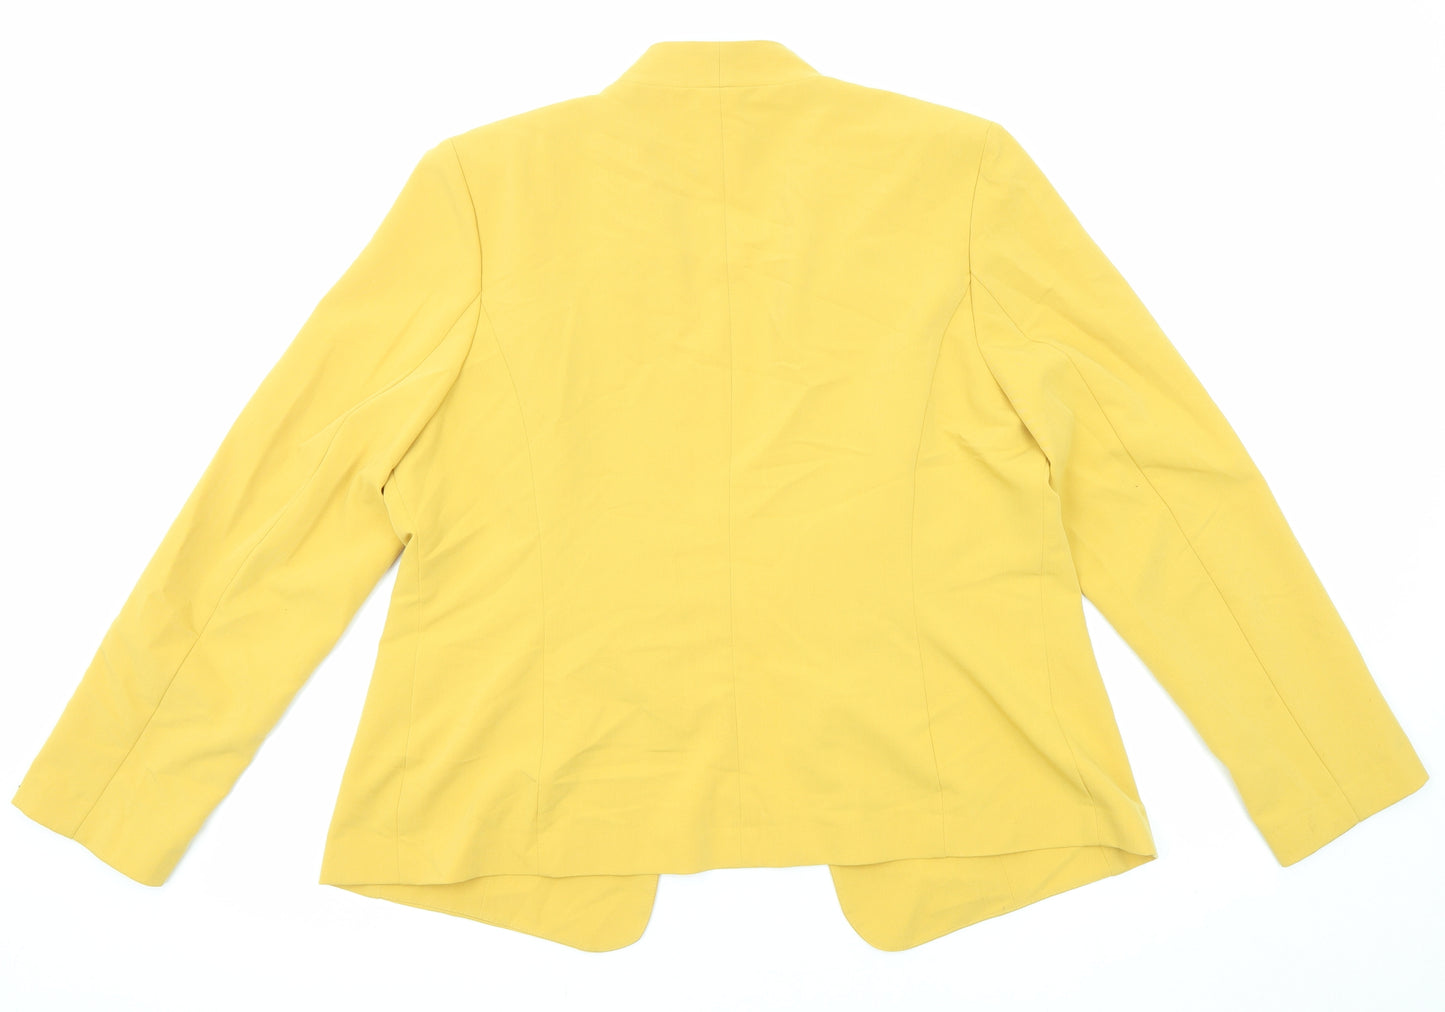 Marks and Spencer Womens Yellow Jacket Blazer Size 16